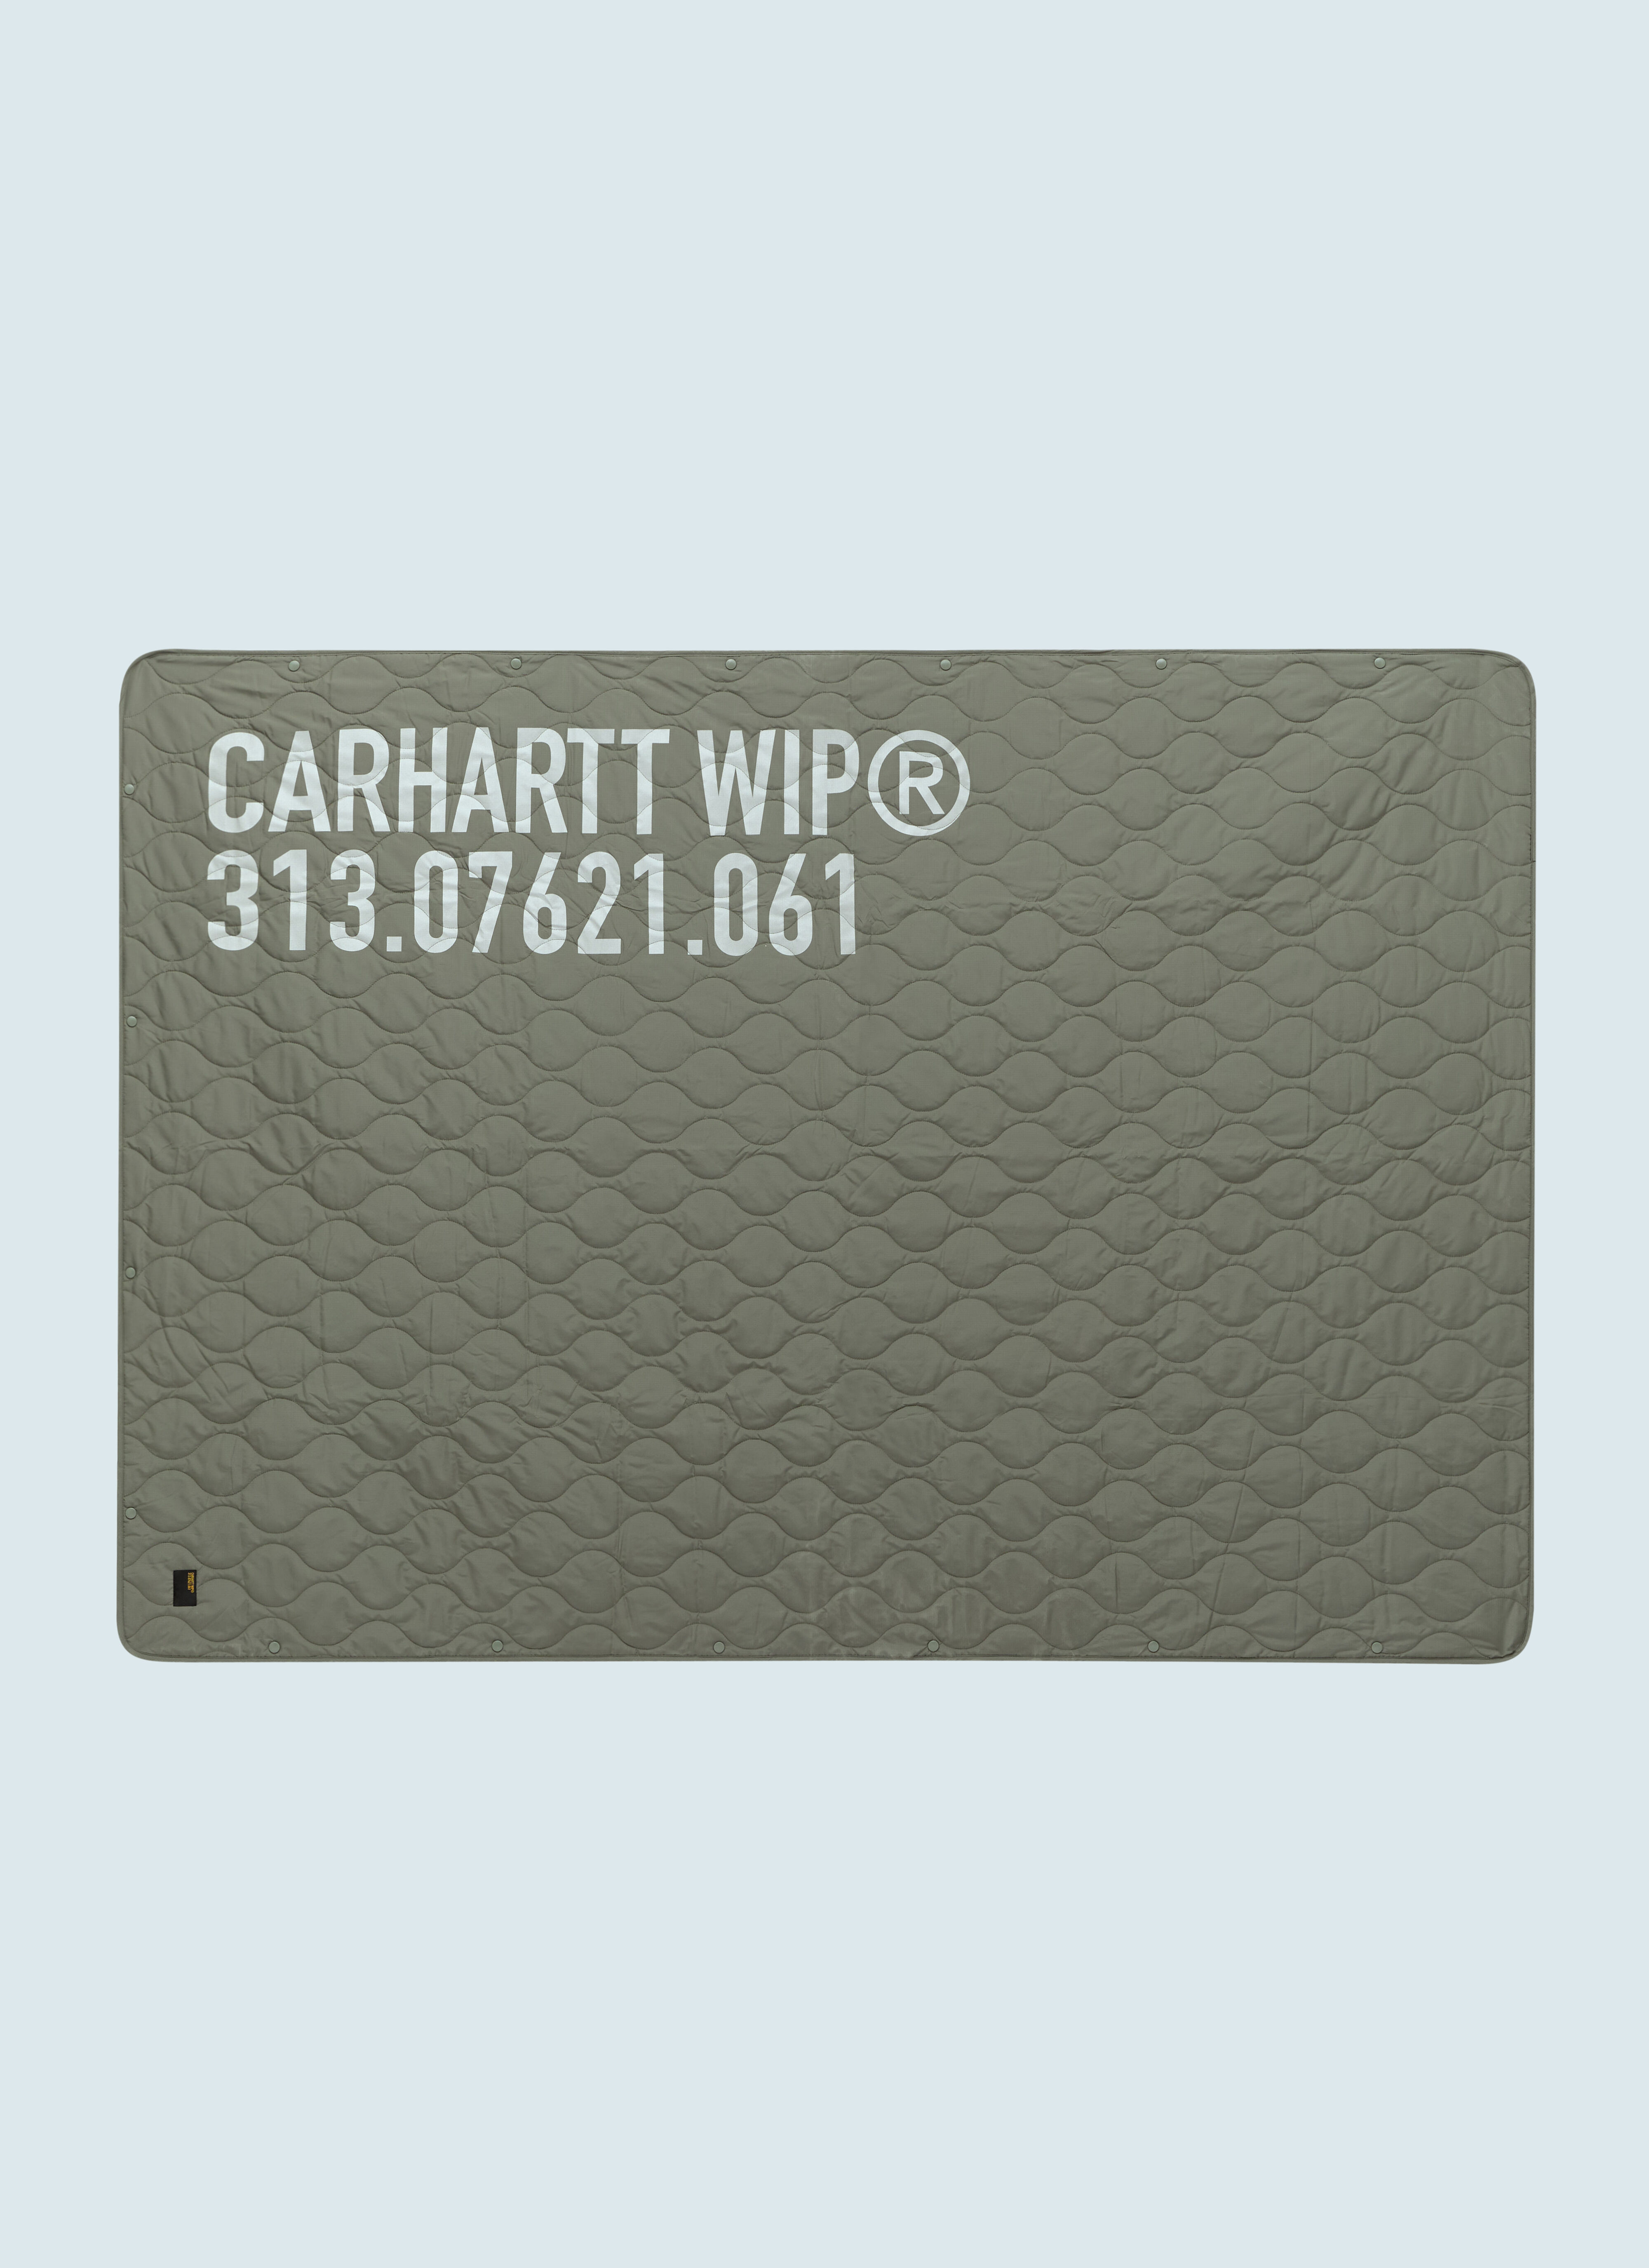 Carhartt WIP Tour Quilted Blanket Black wip0155008